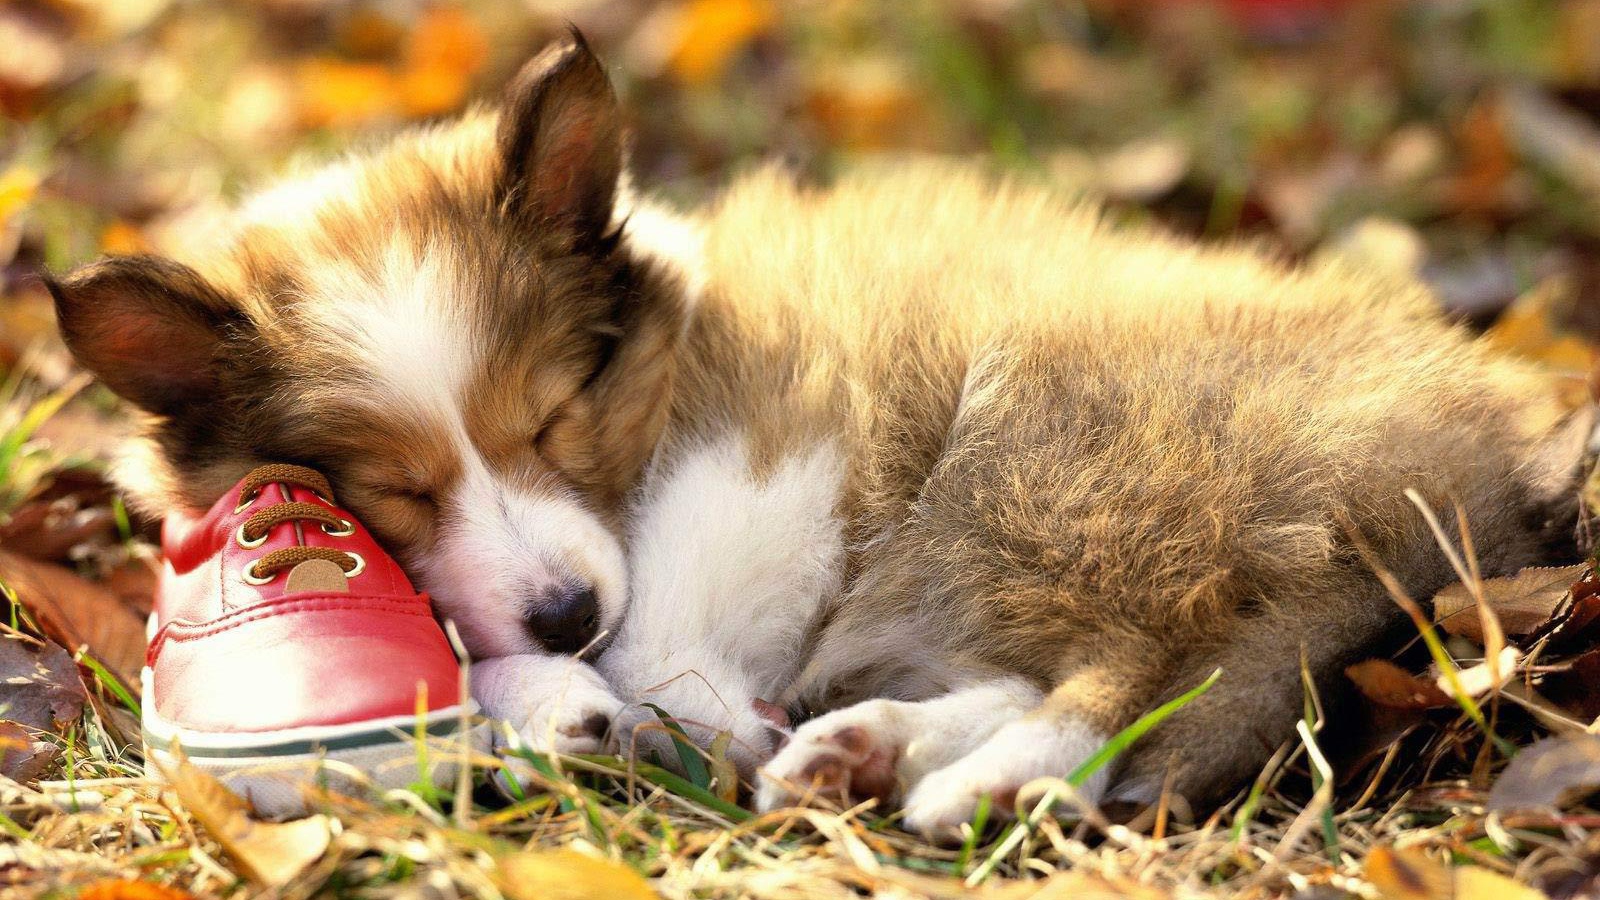 Collie puppy sleeping on a sneaker